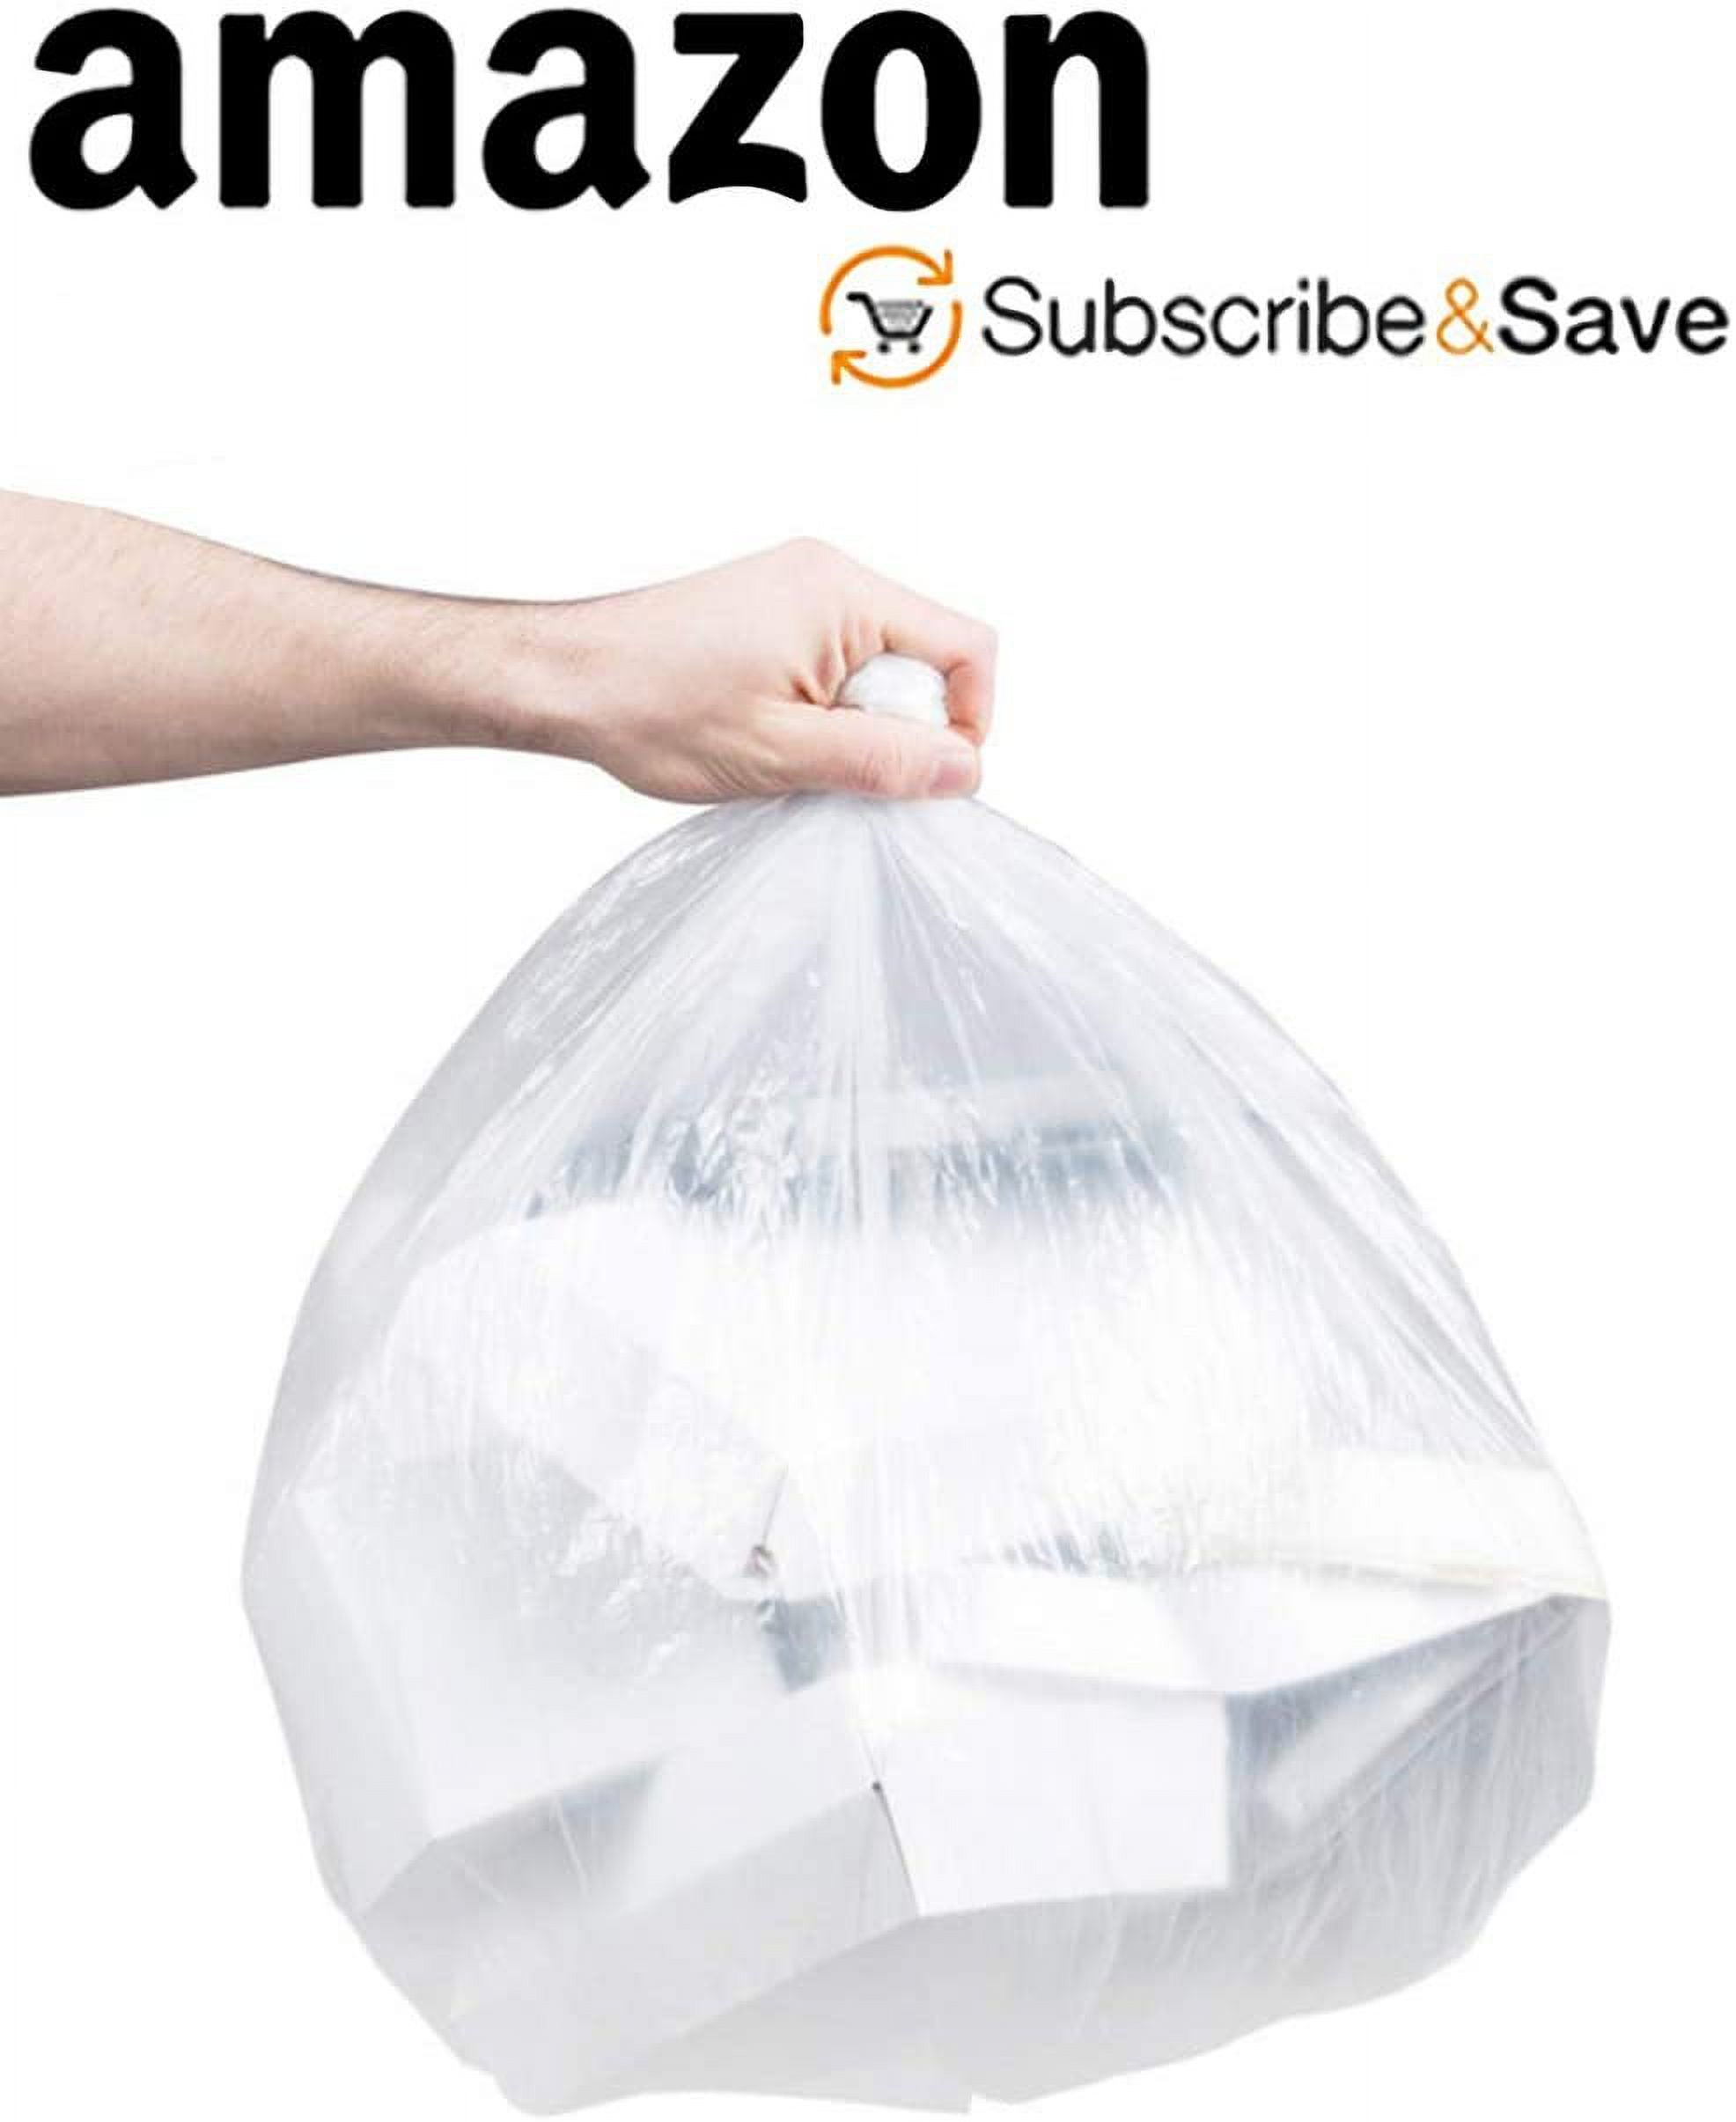 CCLINERS 2.6 Gallon 240 Clear Small Trash Bags Bathroom Garbage Bags 10 Liter Plastic Wastebasket Trash Can Liners for Home and Office